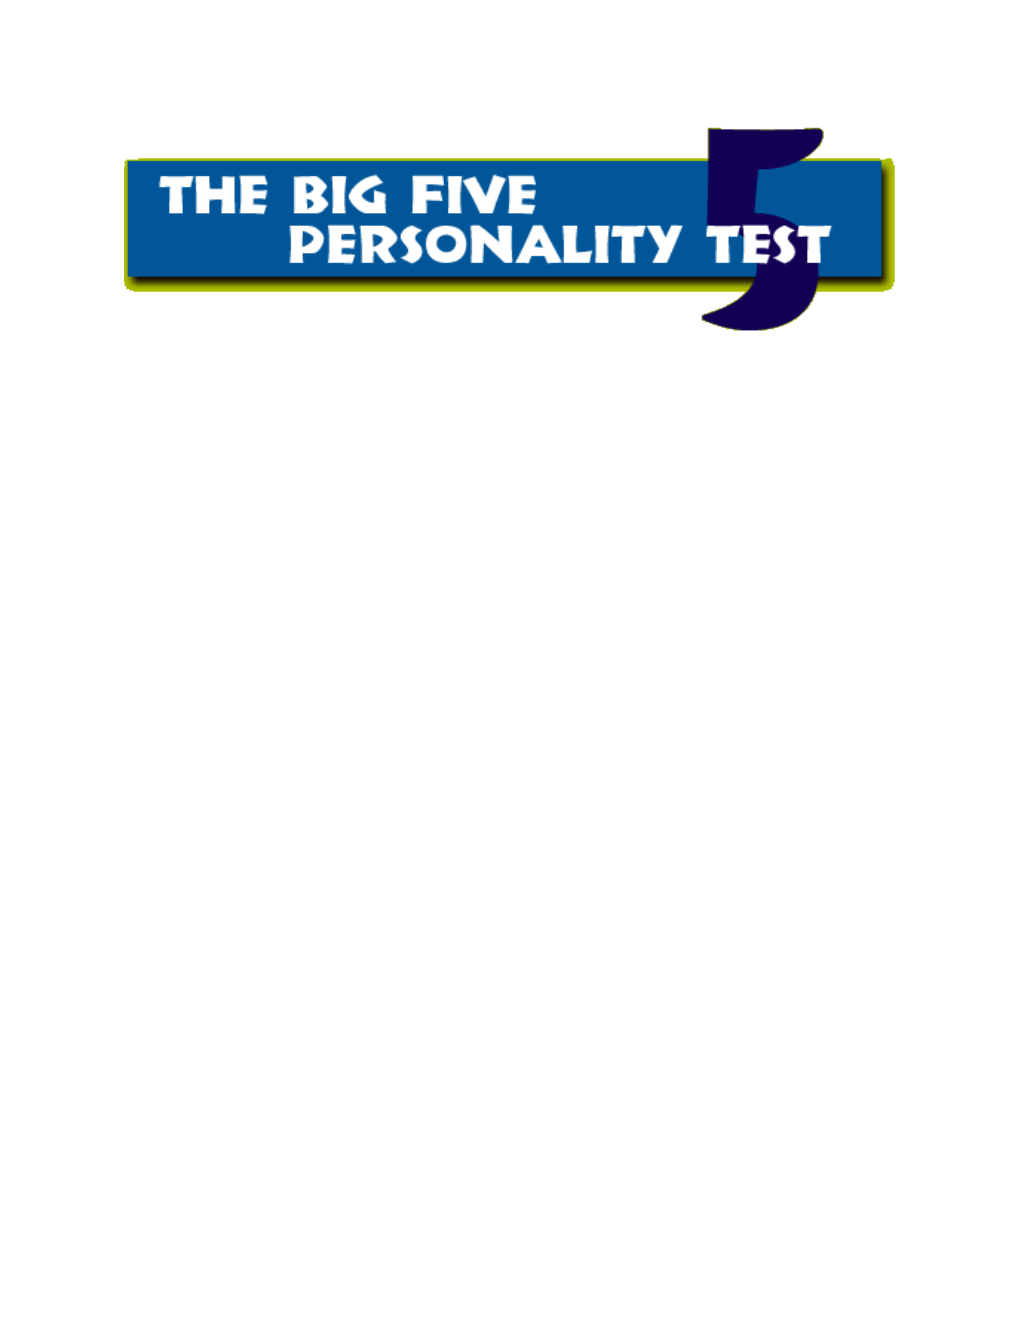 Learn More About the Big Five by Reading Answers to Commonly Asked Questions